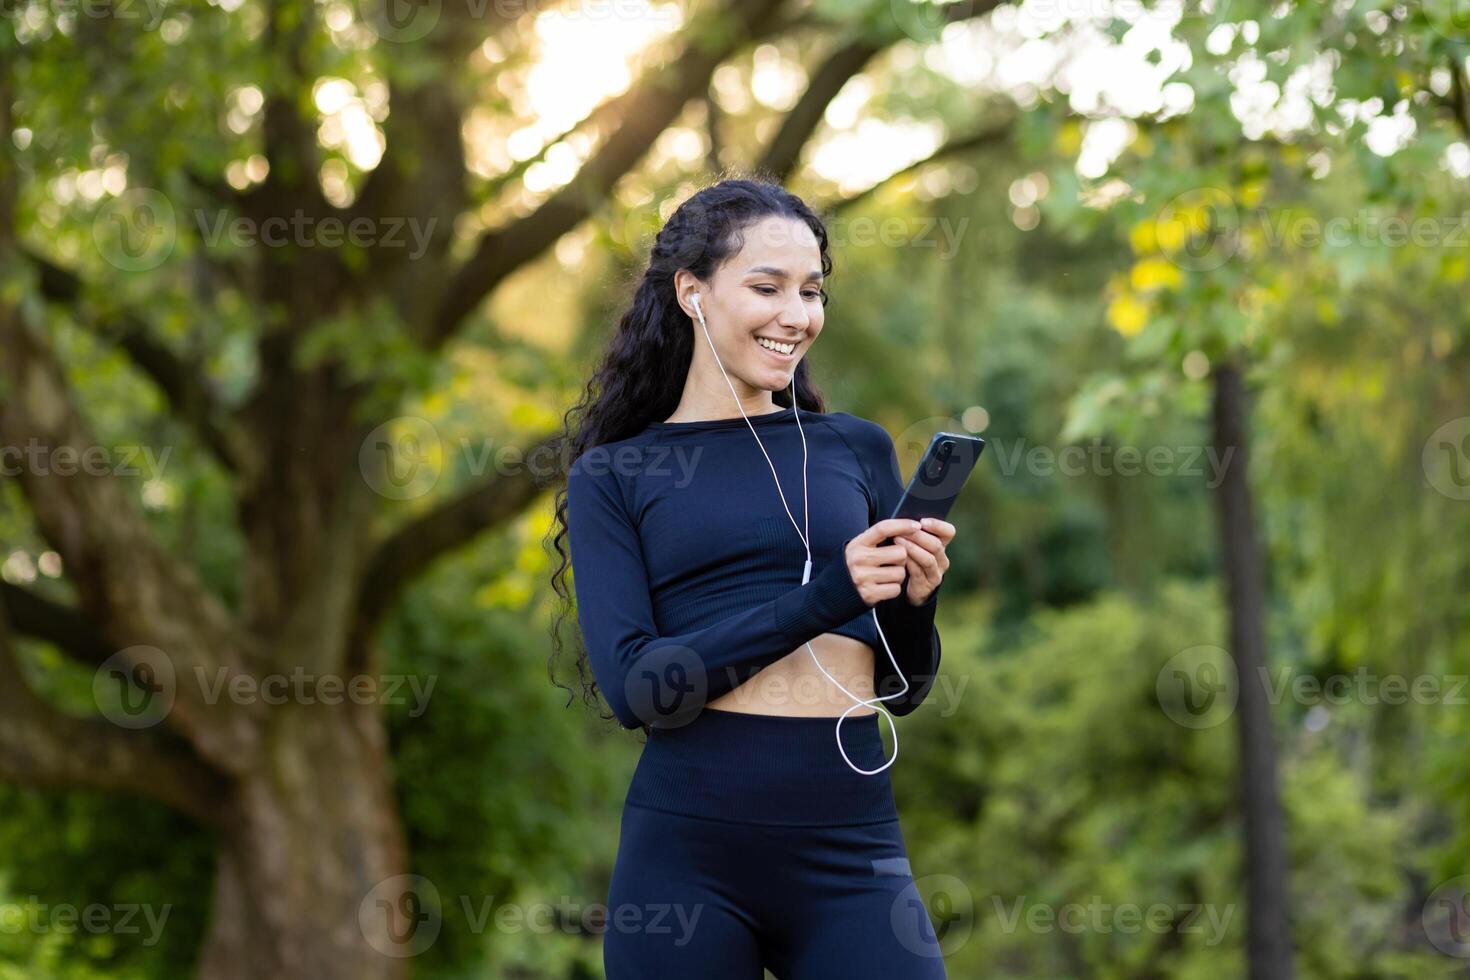 Fitness enthusiast takes a break in a lush park to choose music or track progress on her phone, capturing a moment of technology in fitness. photo